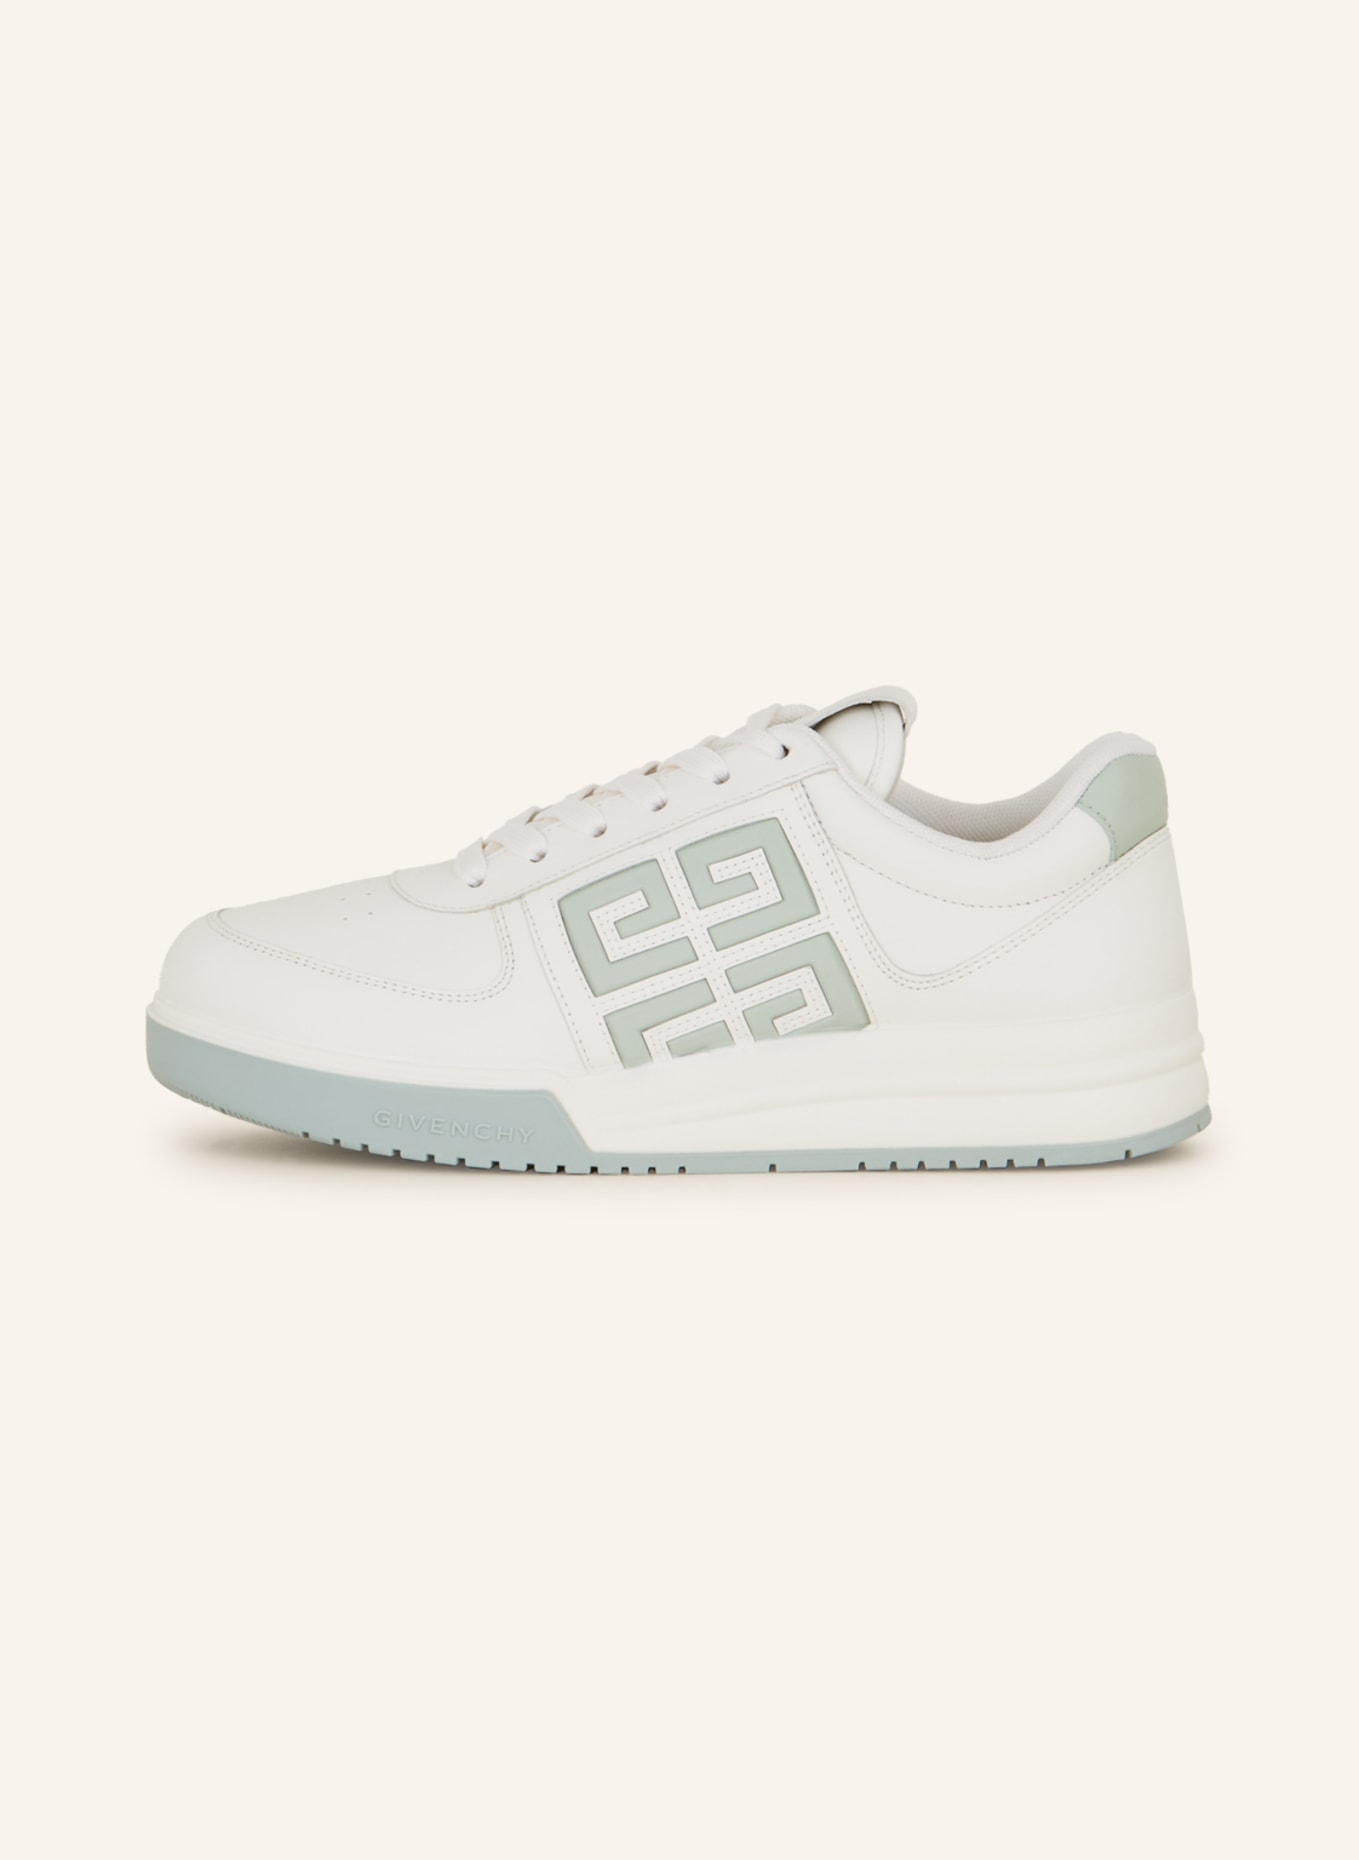 GIVENCHY Sneaker G4 , Farbe: WEISS/ MINT (Bild 4)